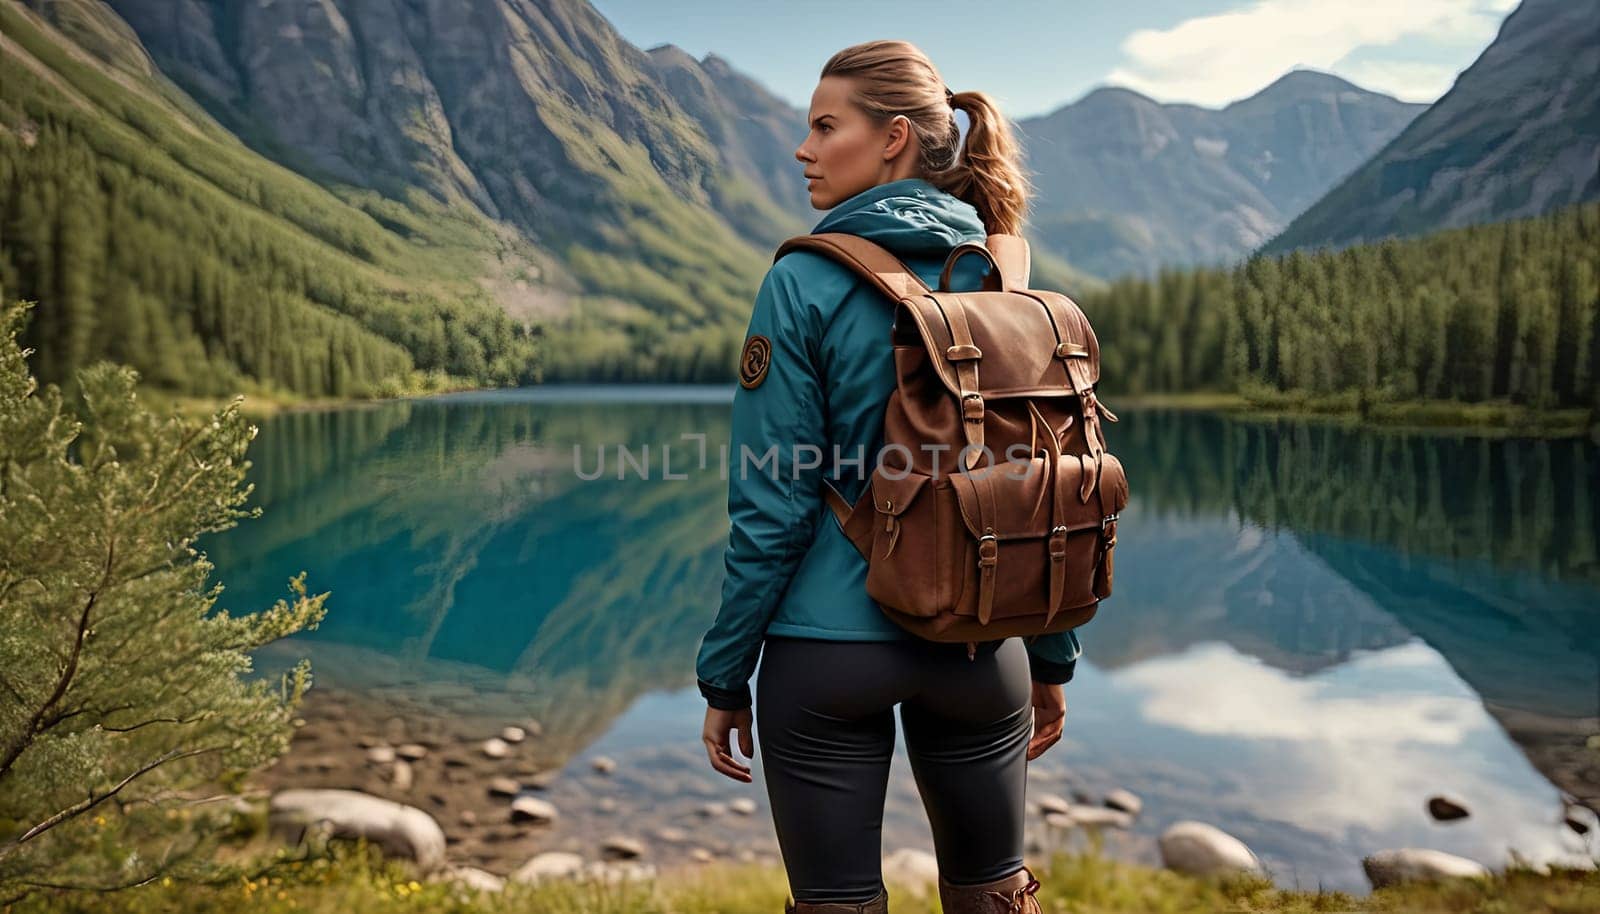 A woman is standing in front of a lake wearing a blue jacket and a brown backpack. Concept of adventure and exploration, as the woman is likely preparing for a hike or a camping trip in the mountains. by Matiunina